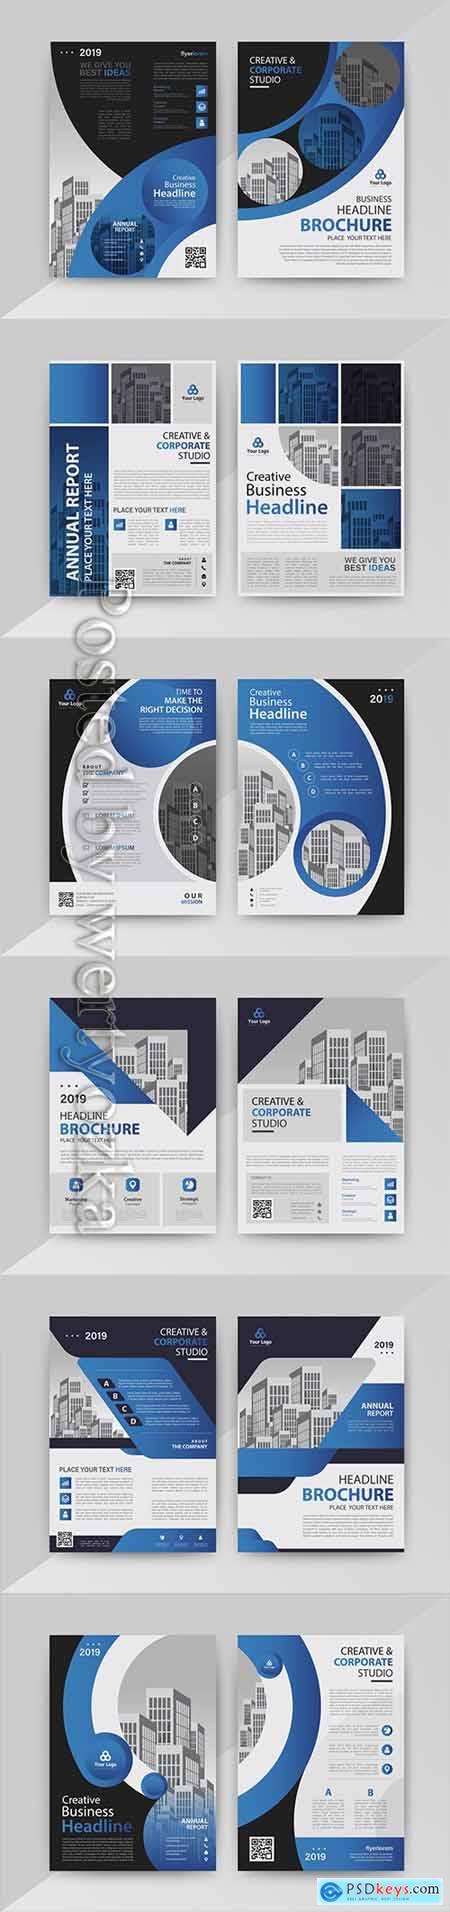 Business vector template for brochure, annual report, magazine168